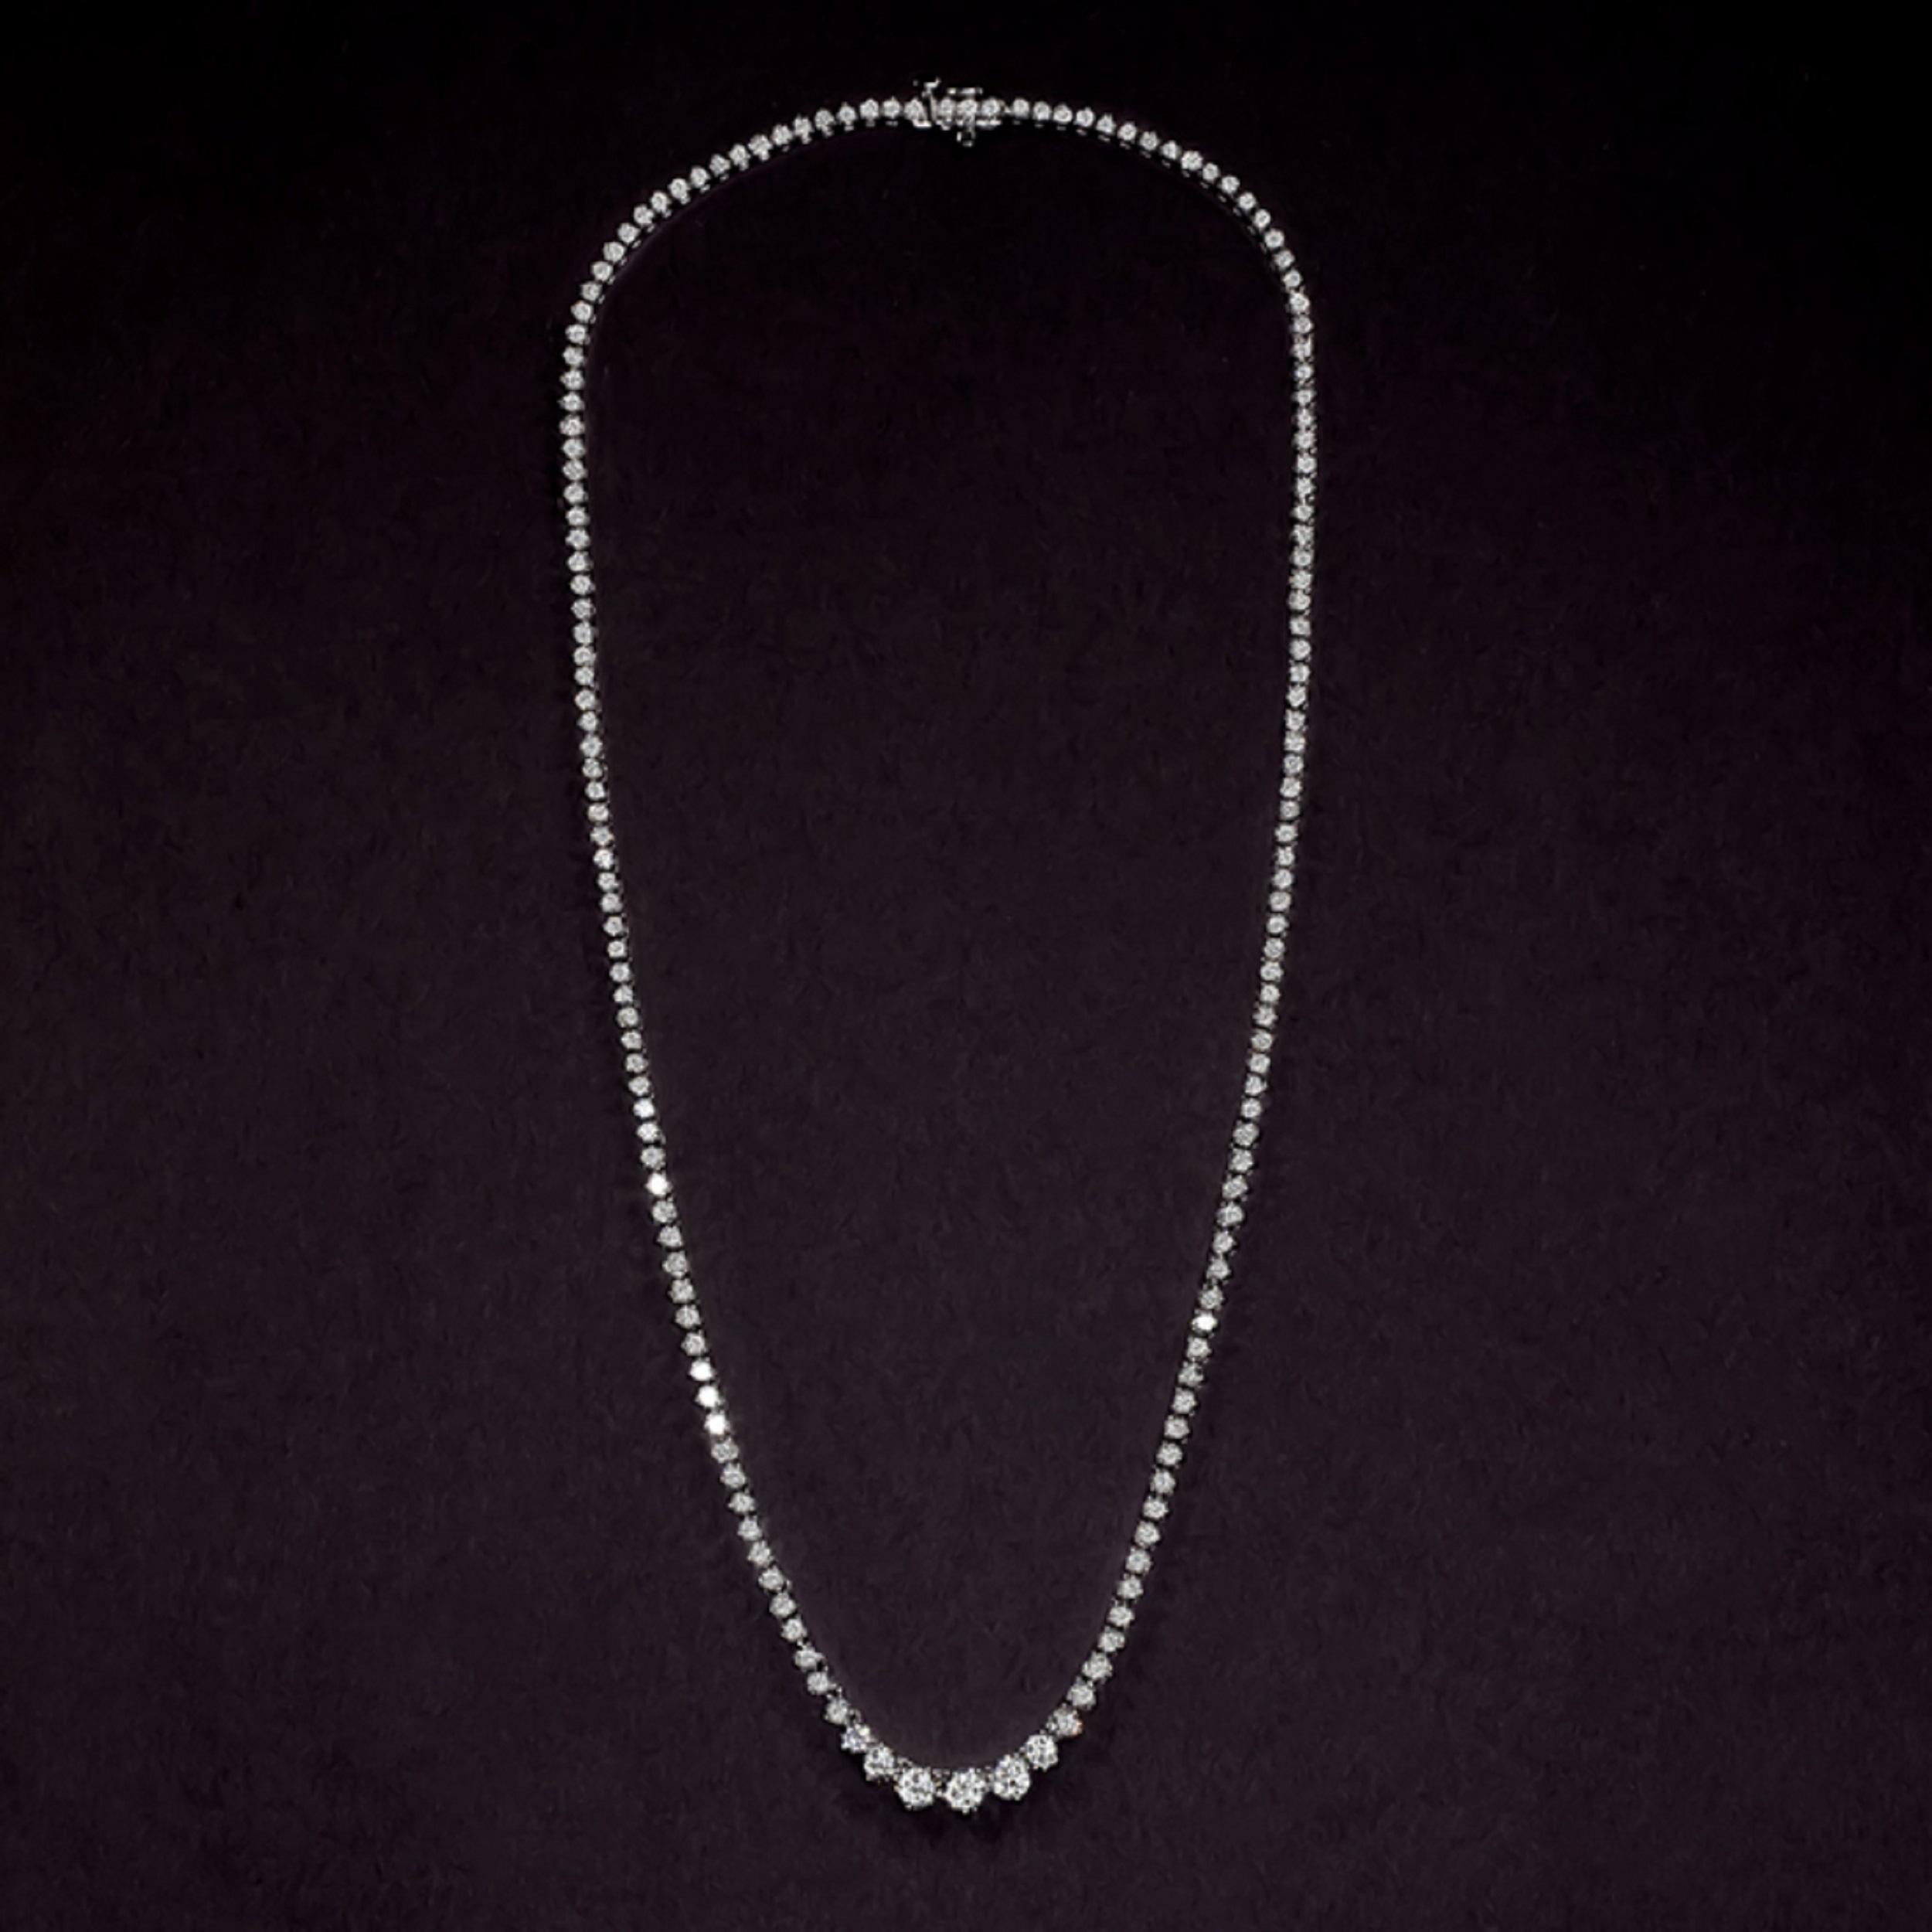 Timelessly elegant riviera necklace dazzles with 18 carats of bright white, eye clean, and excellently cut diamonds. Exceptionally well cut, these diamonds are very bright and lively! The diamonds are gracefully graduated, and overall, the necklace